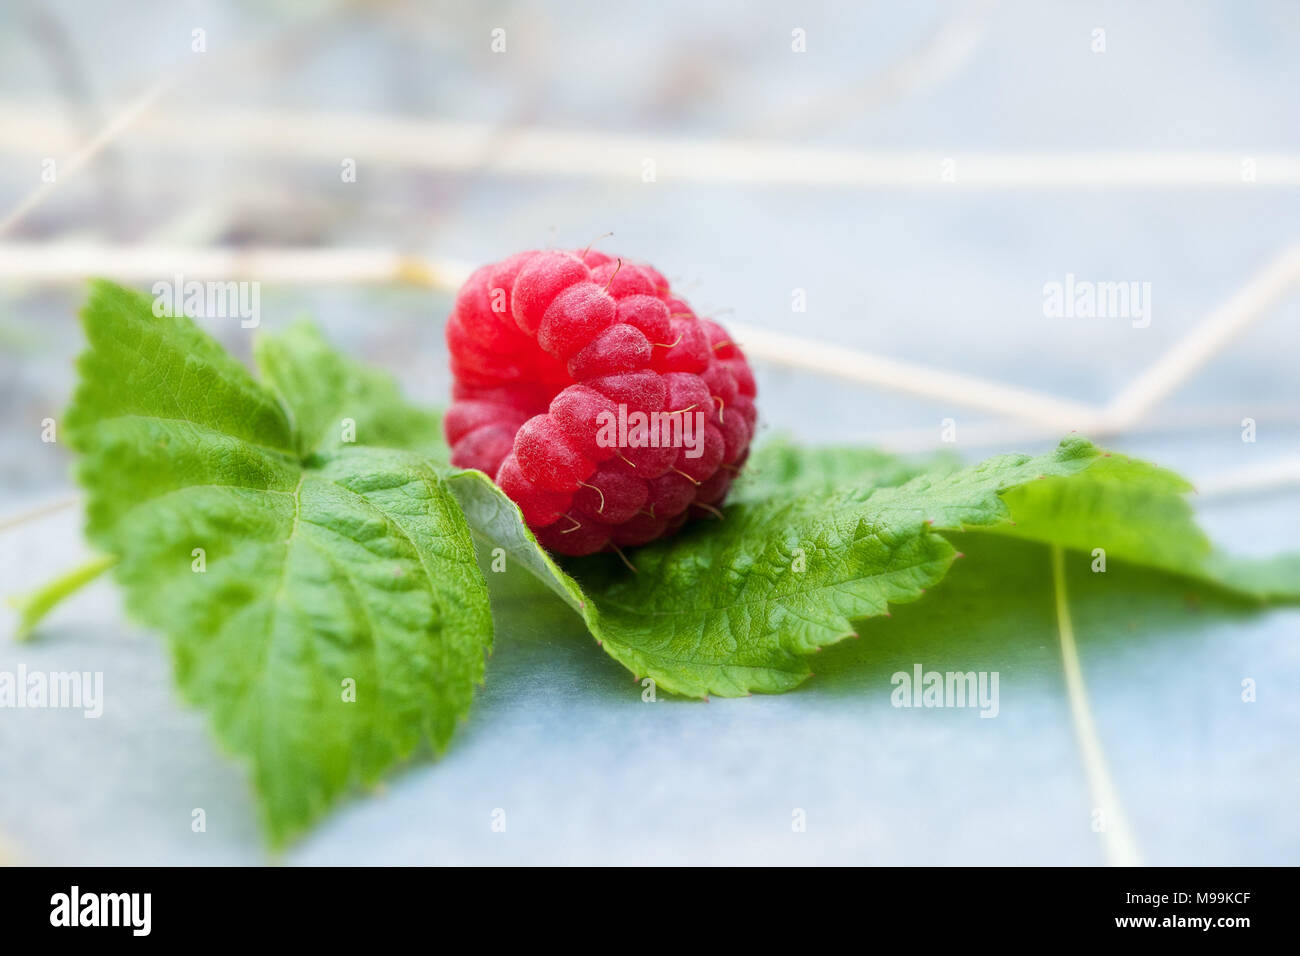 Raspberry with green leaf. Stock Photo